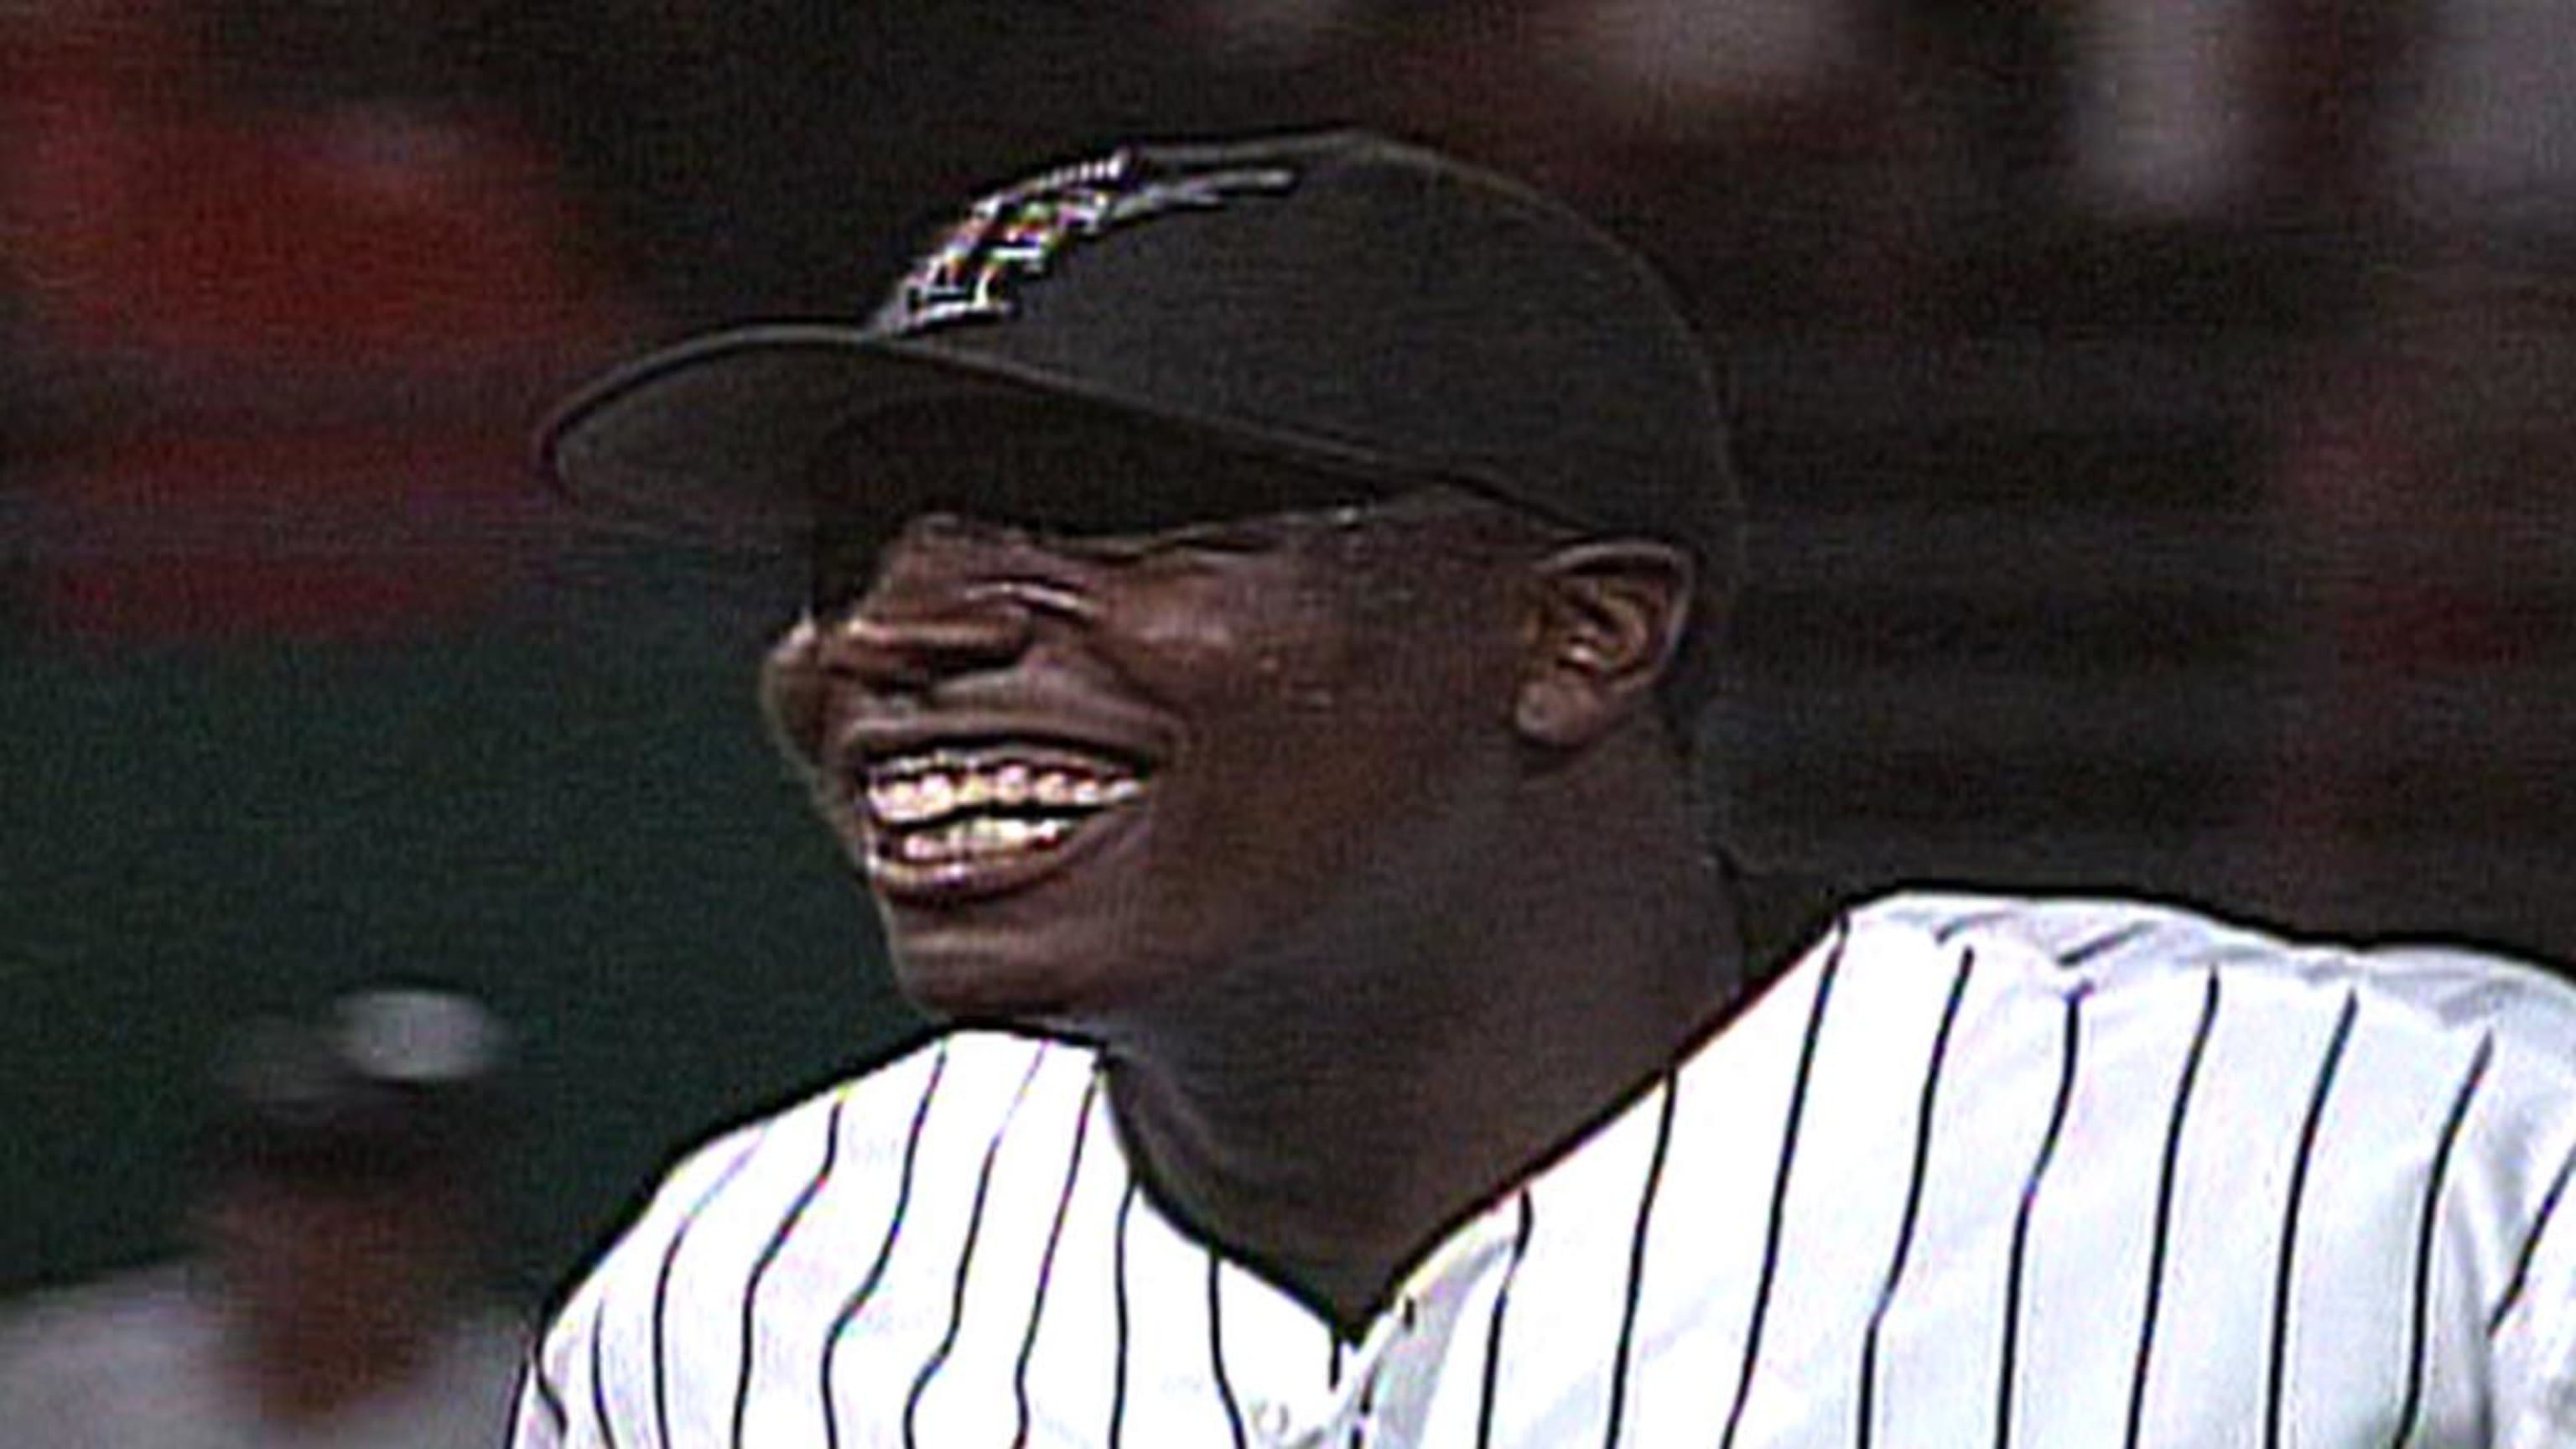 The five things that we'll remember most about Dontrelle Willis' career